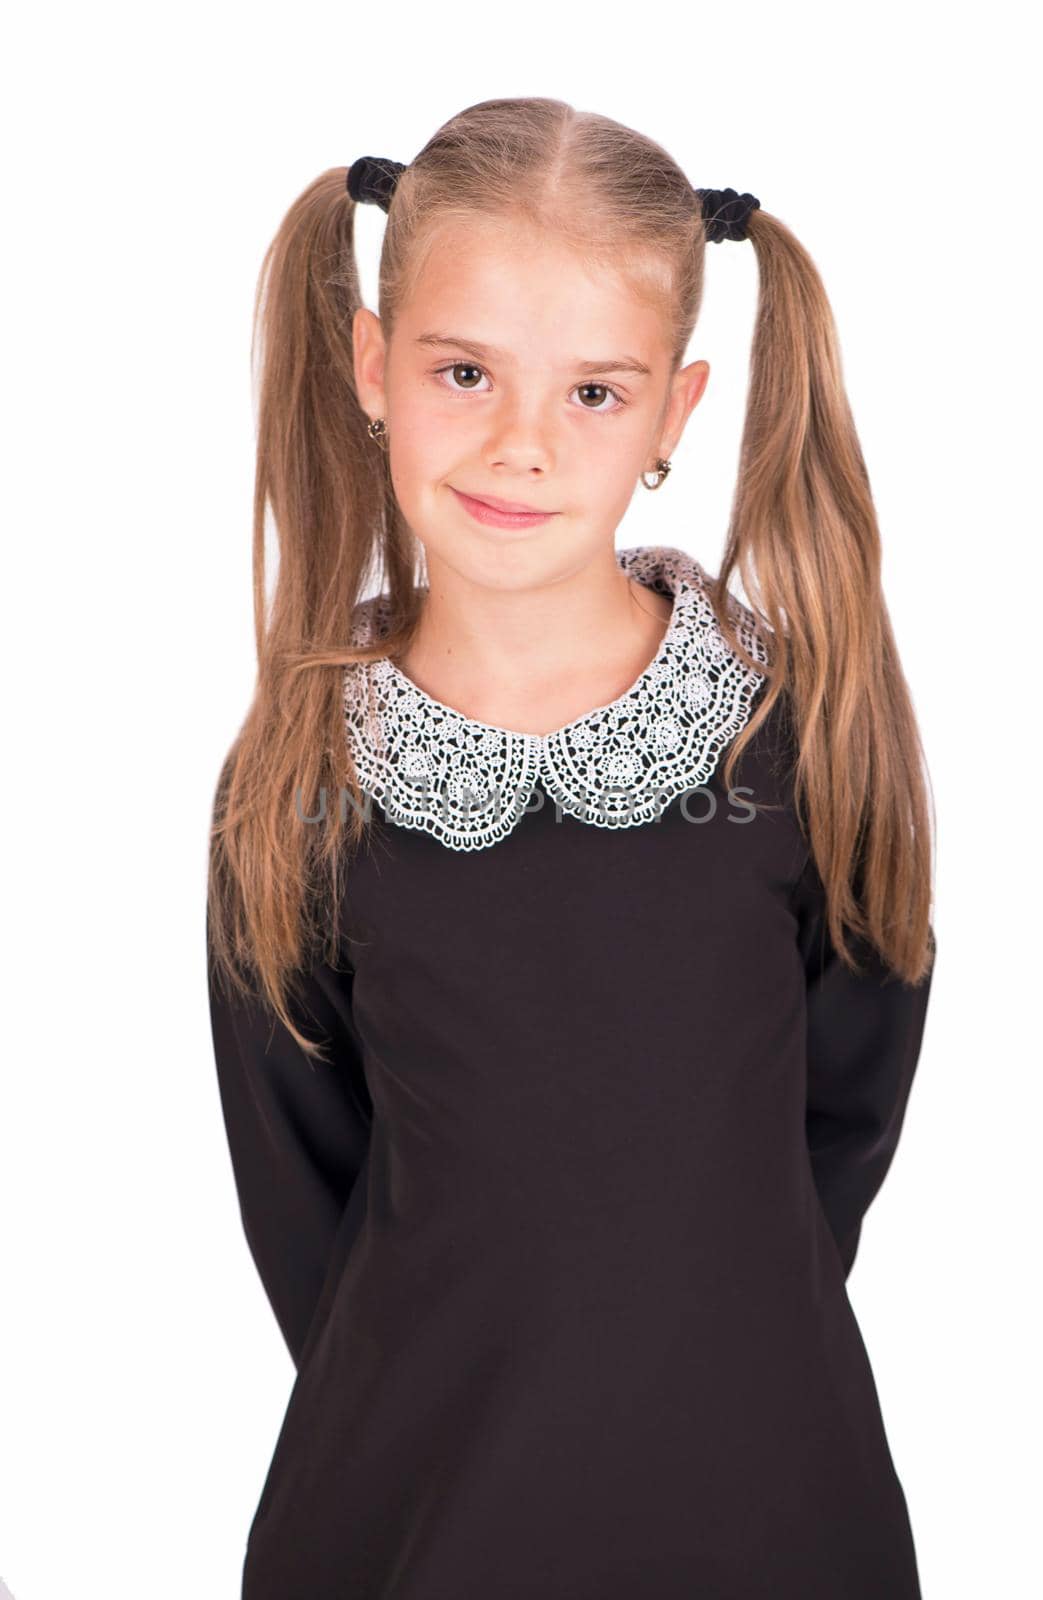 portrait of the youngest schoolgirlisolated on white background.